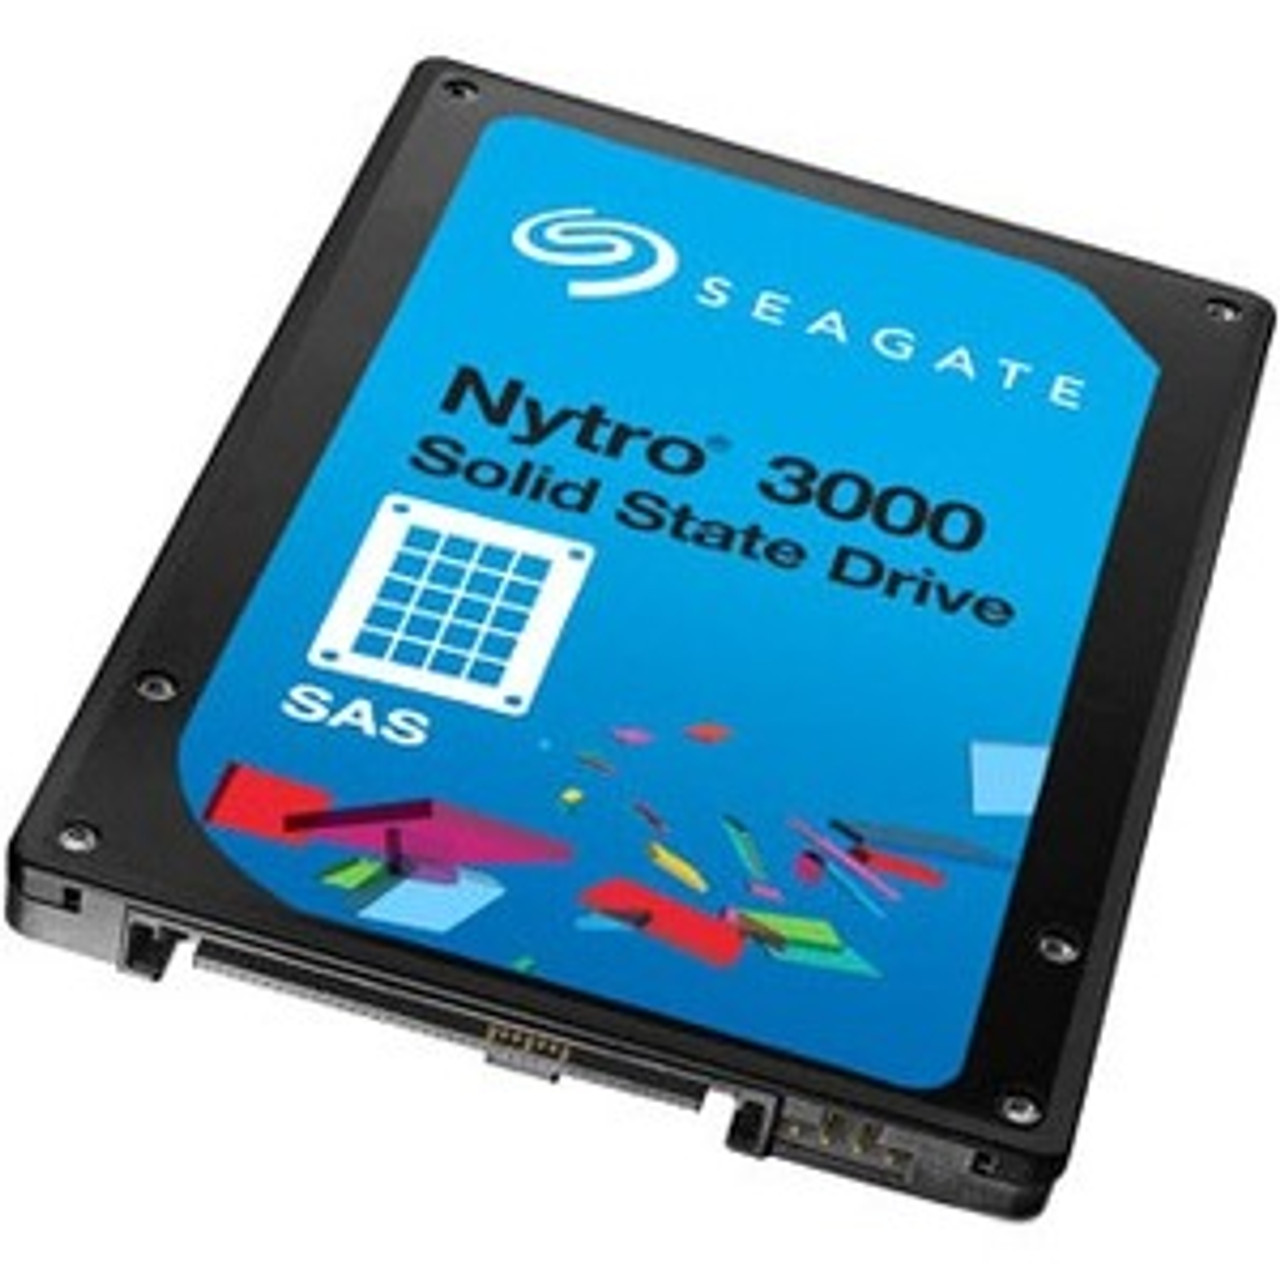 Seagate Nytro 3330 1.92TB eTLC SAS 12Gbps Scaled Endurance 2.5-inch Internal Solid State Drive (SSD) (10-Pack) Mfr P/N XS1920SE10103-10PK